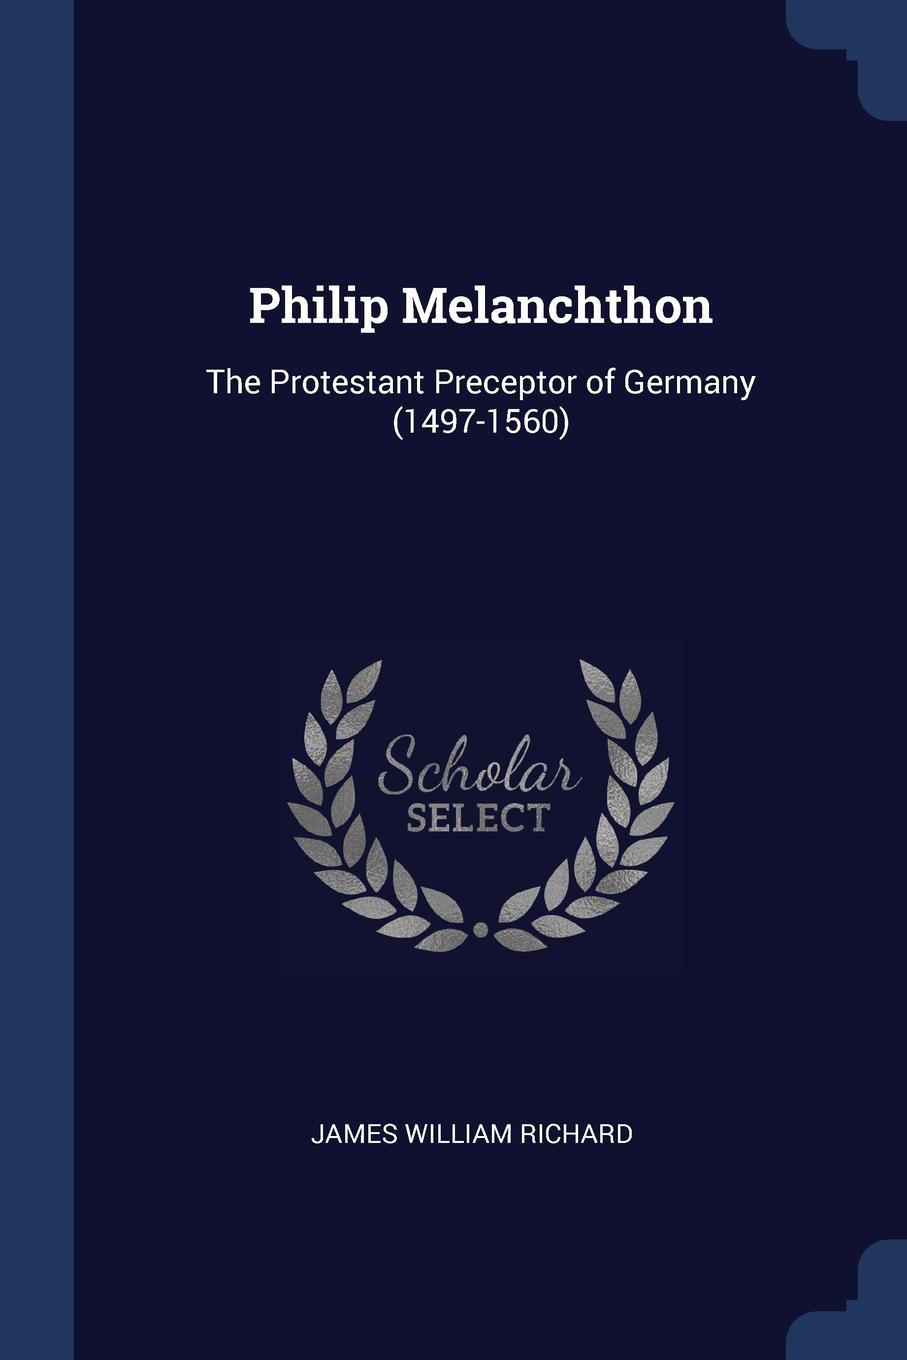 Philip Melanchthon. The Protestant Preceptor of Germany (1497-1560)